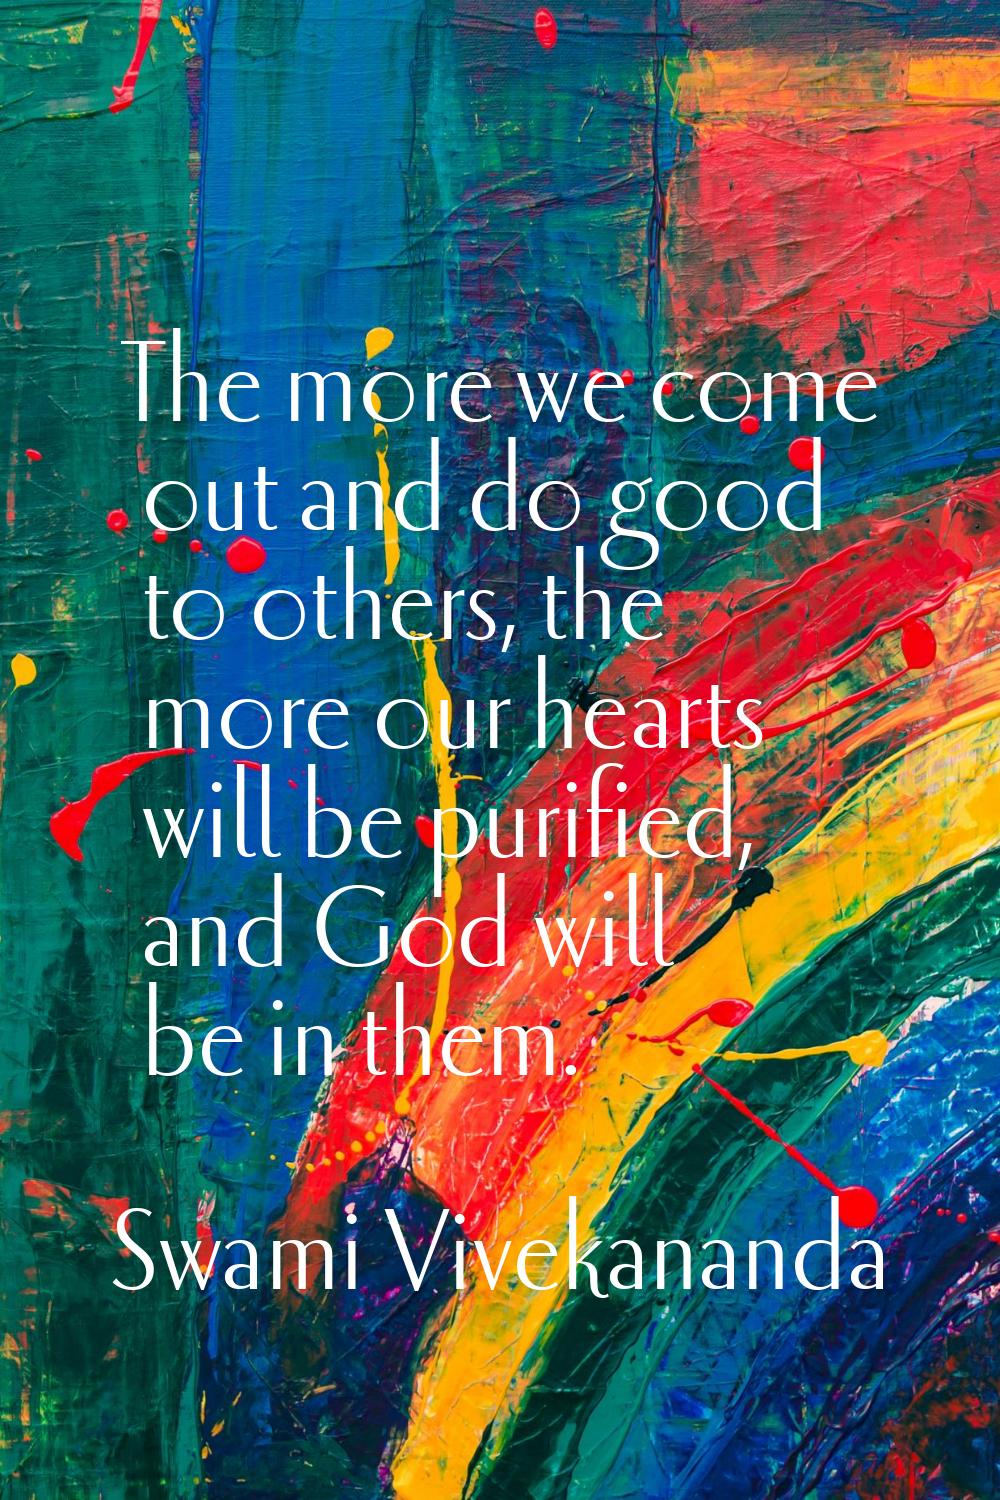 The more we come out and do good to others, the more our hearts will be purified, and God will be i